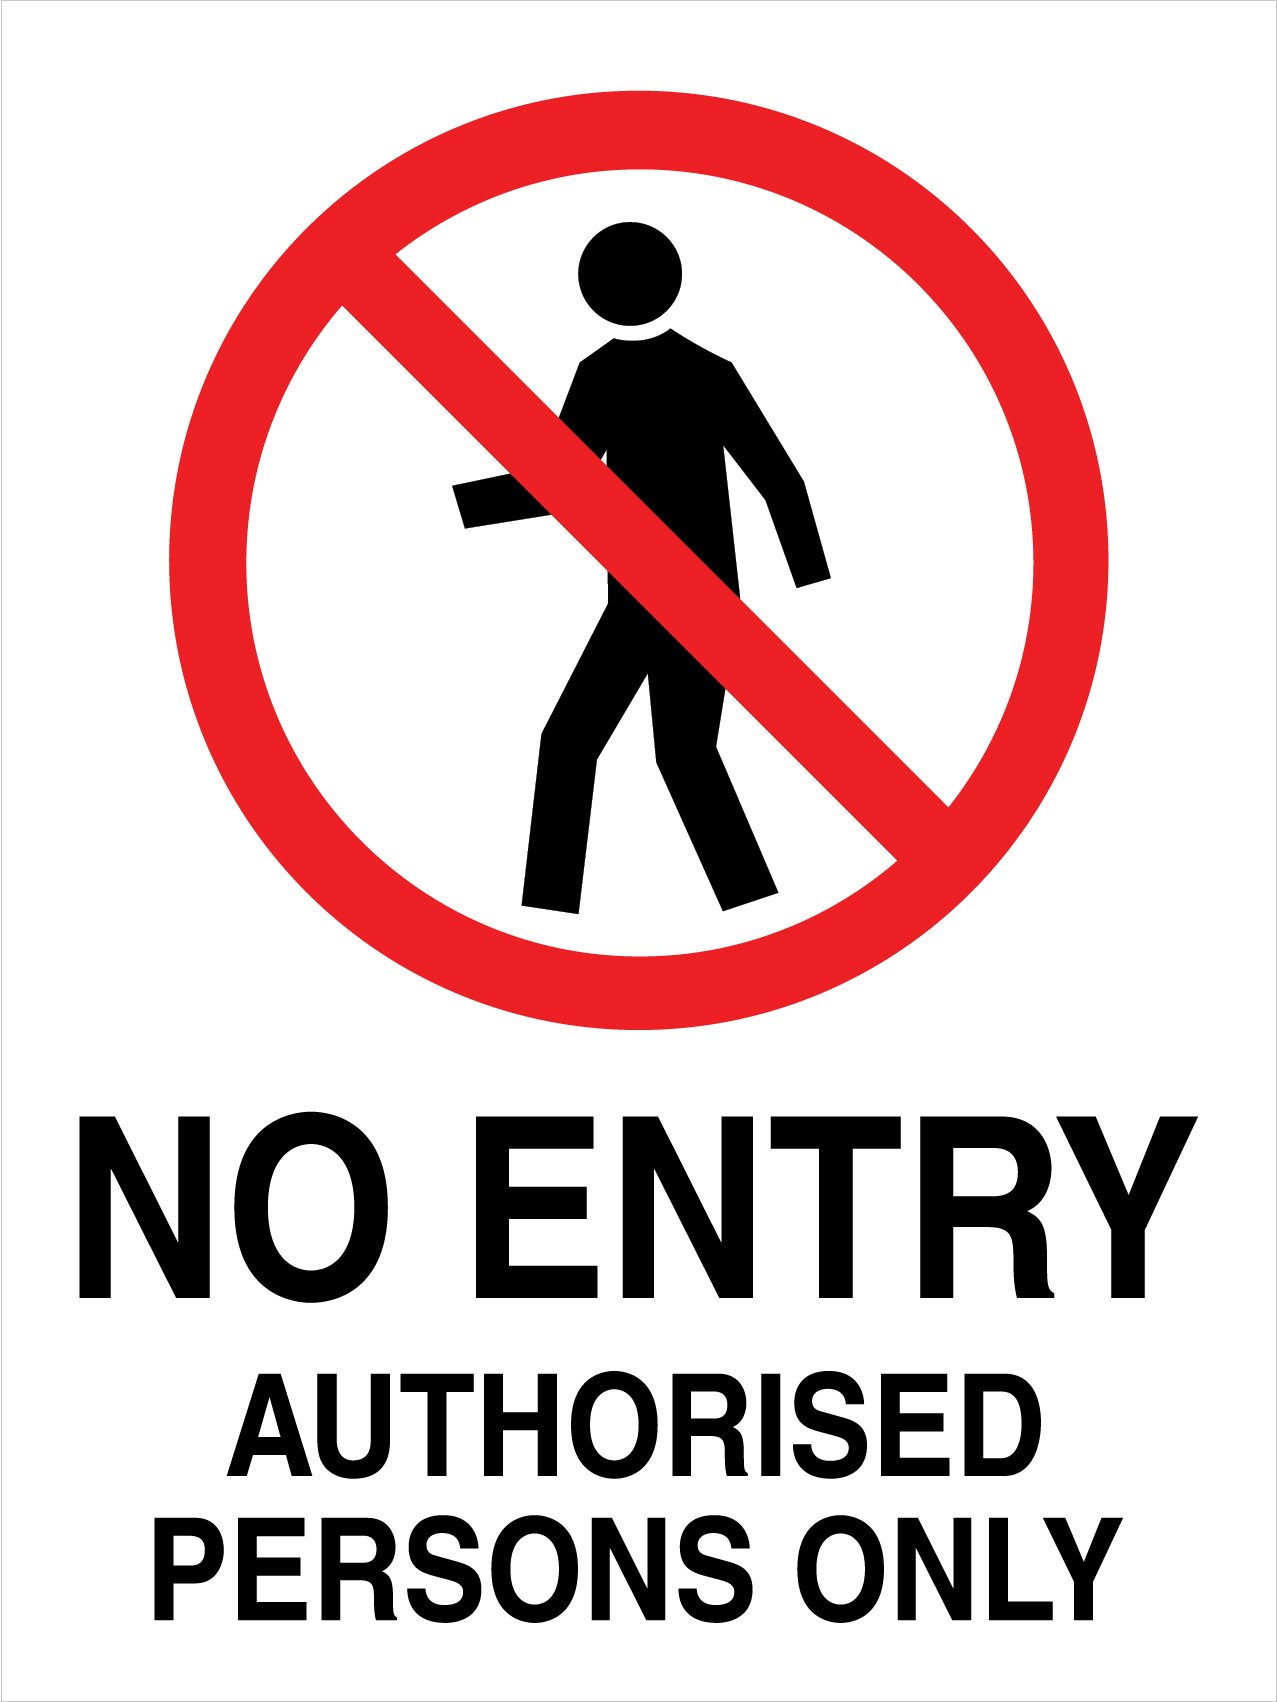 Prohibition - No Entry Authorised Persons Only